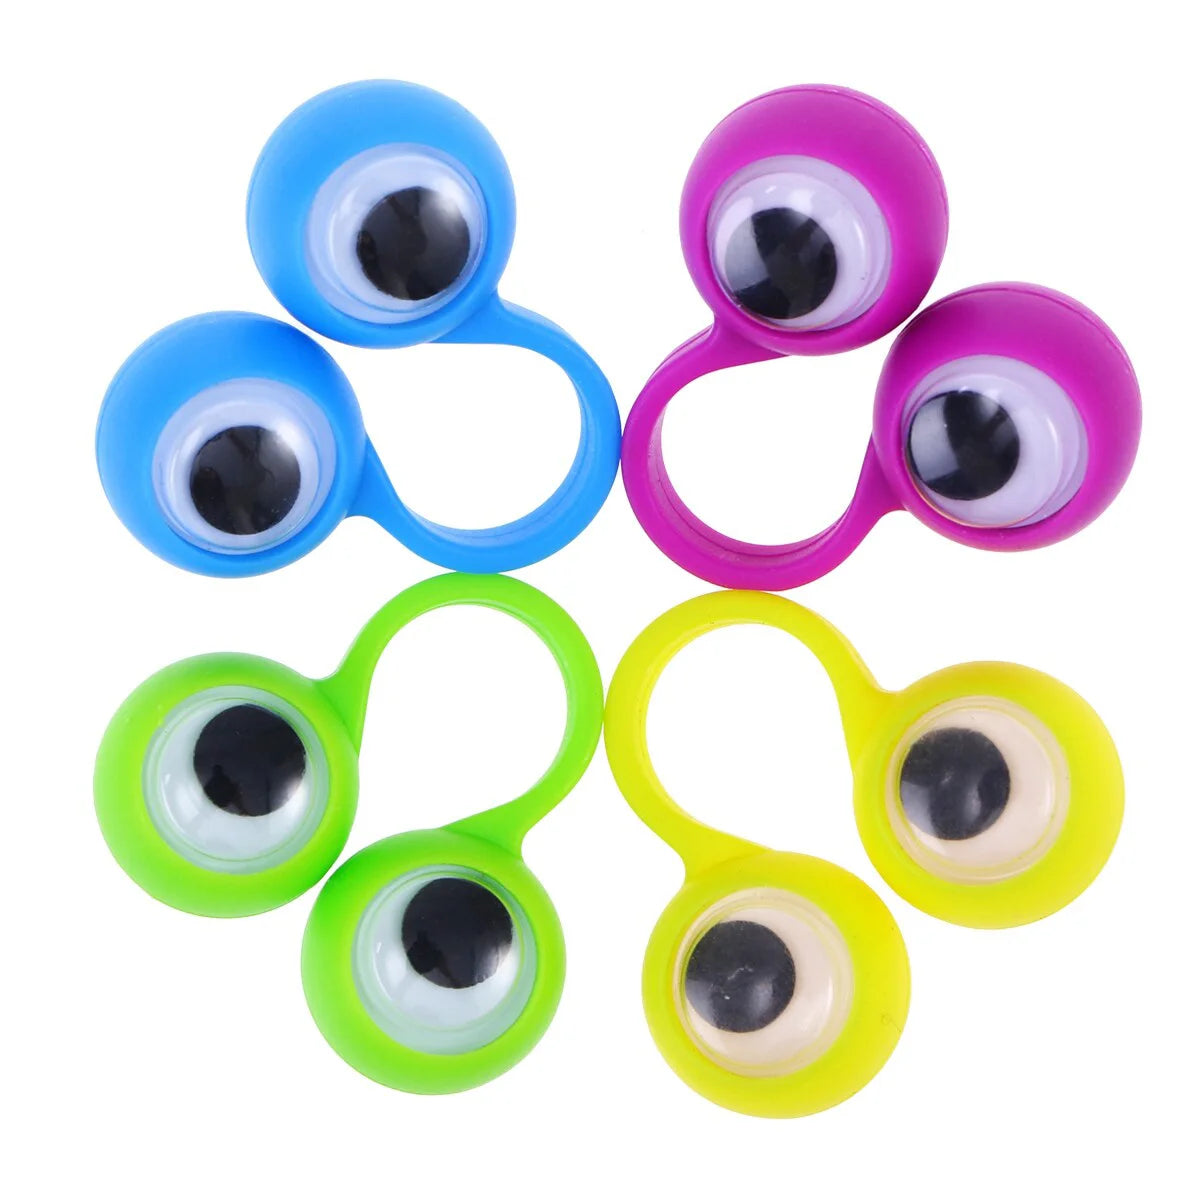 Eye Finger Puppets for Educational Role-Playing and Theater